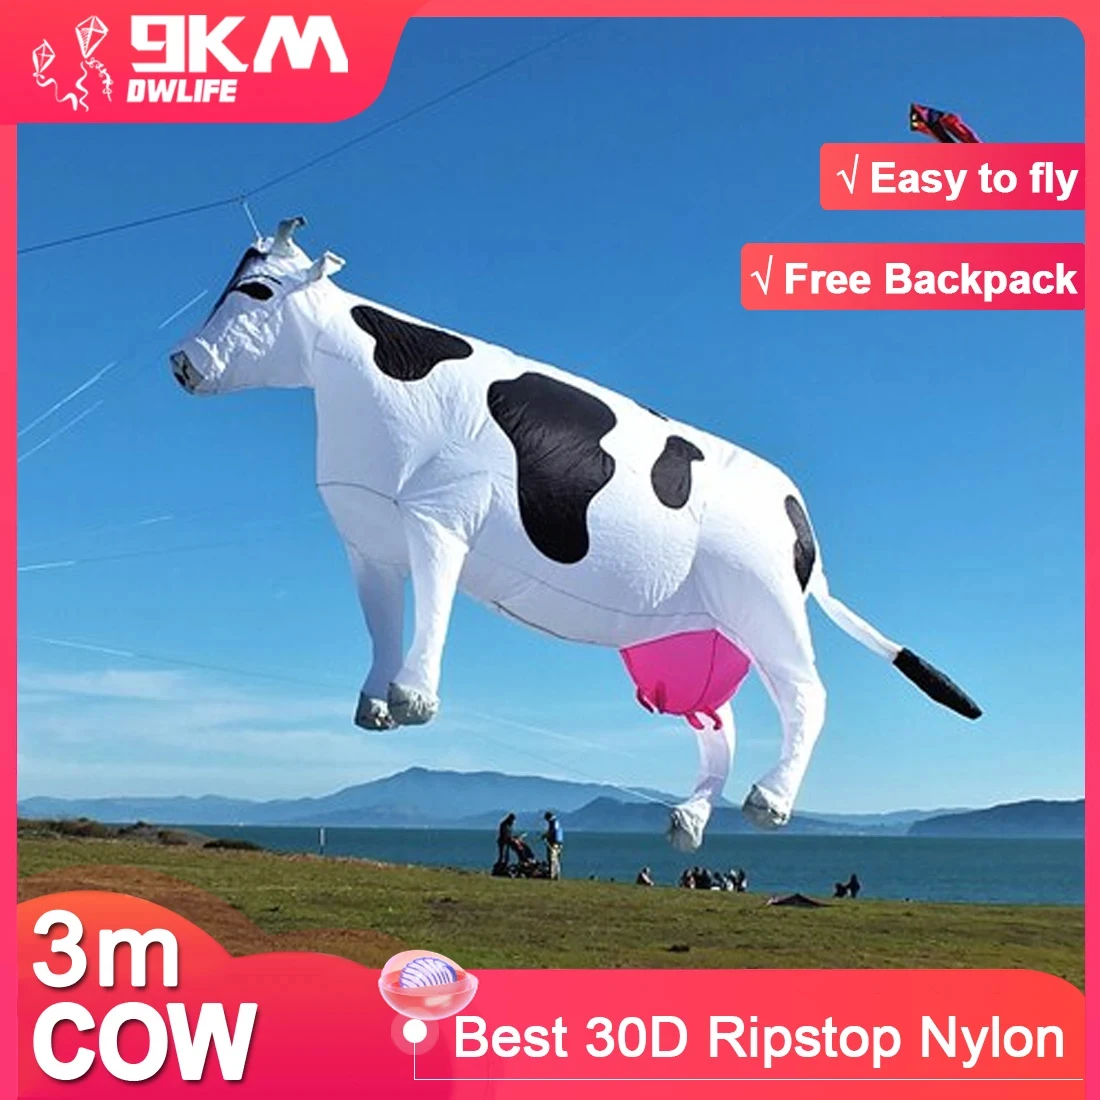 

9KM 3m Cow Kite Line Laundry Pendant Soft Inflatable Show Kite for Kite Festival 30D Ripstop Nylon with Bag